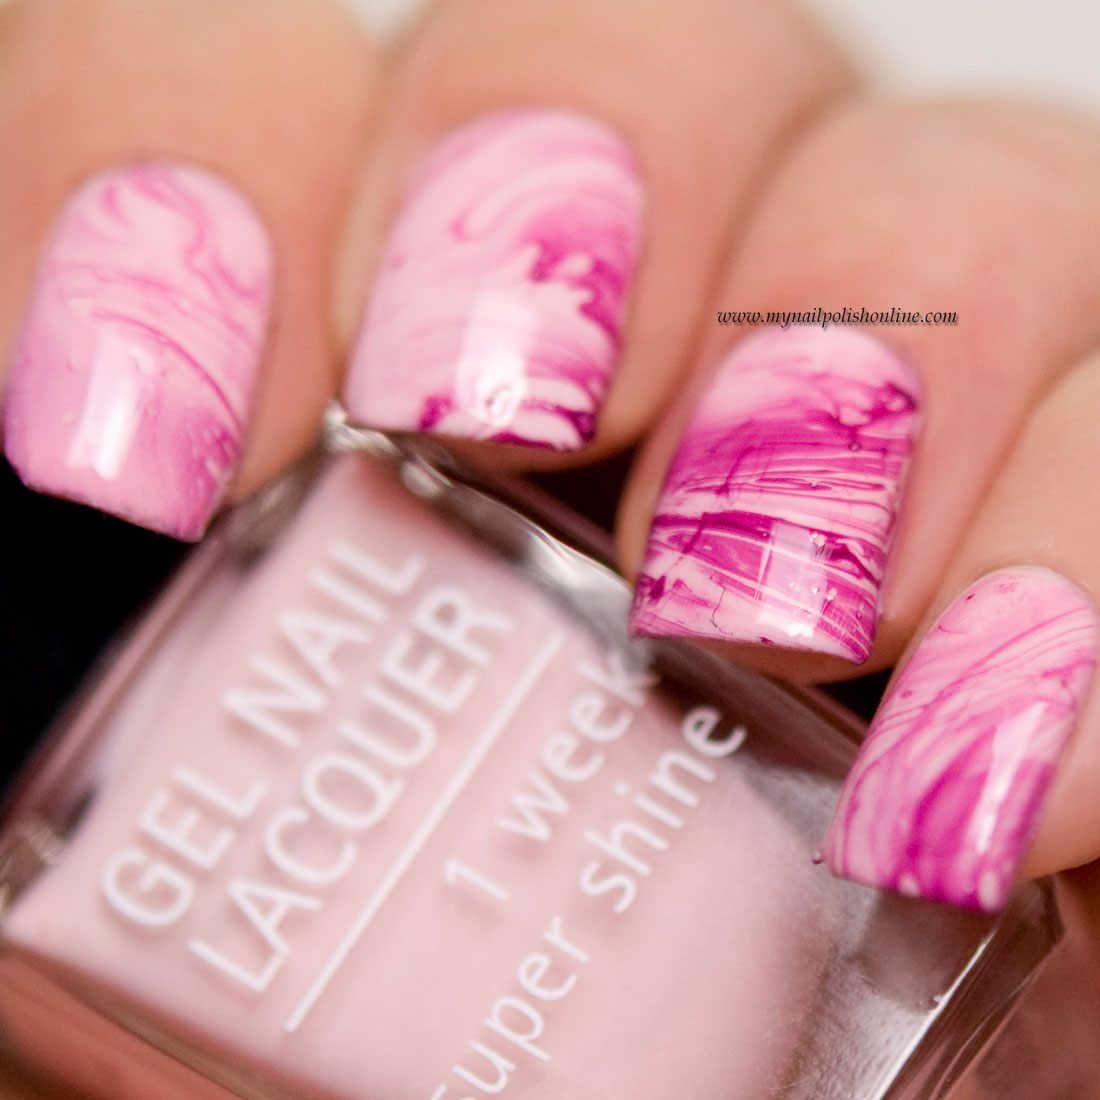 Pink Nail art celebrating the ongoing research of breast cancer